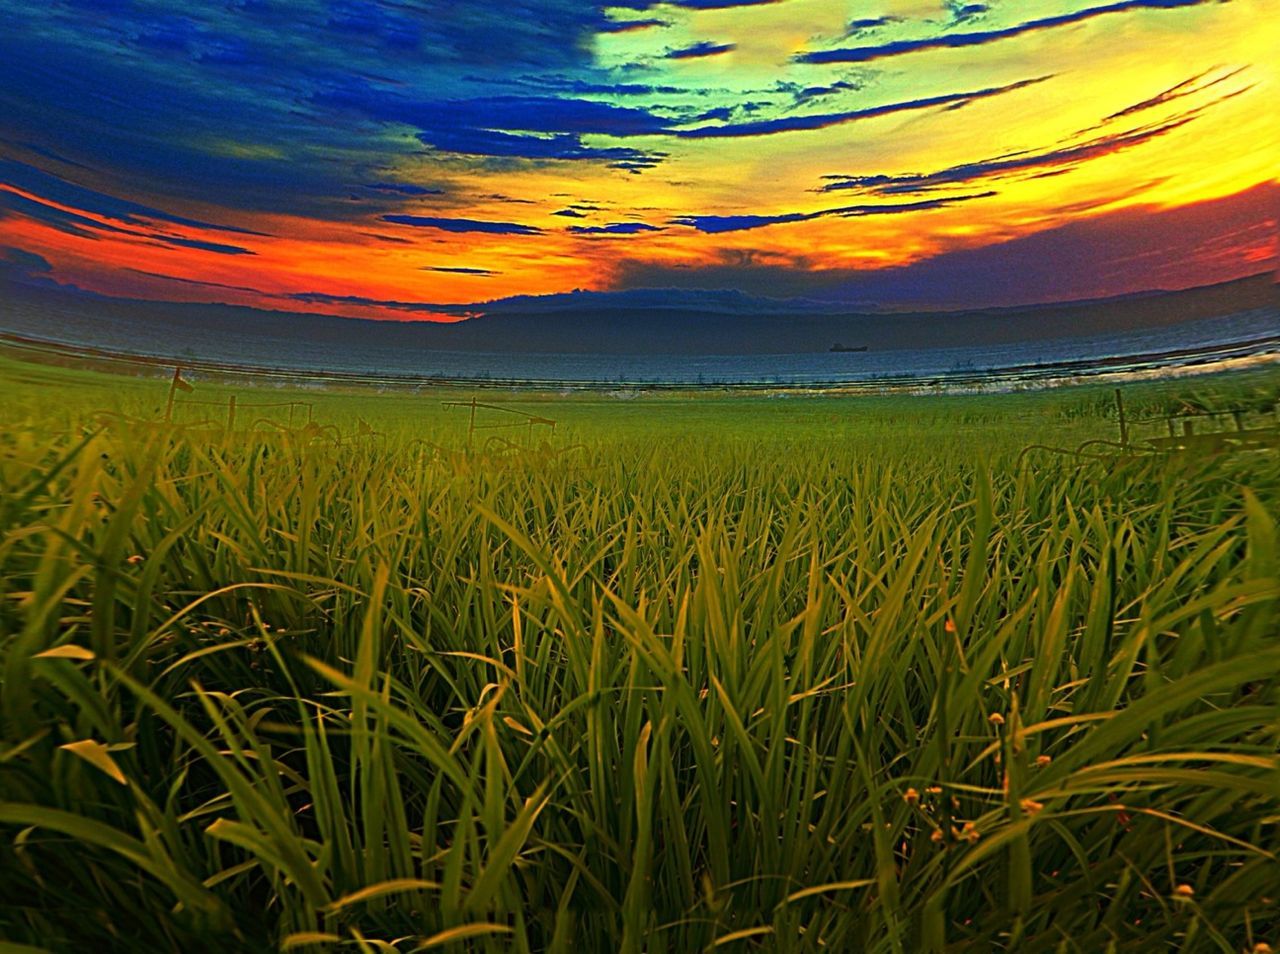 sunset, tranquil scene, scenics, beauty in nature, tranquility, field, landscape, sky, orange color, rural scene, agriculture, nature, growth, farm, idyllic, grass, crop, plant, cultivated land, cloud - sky